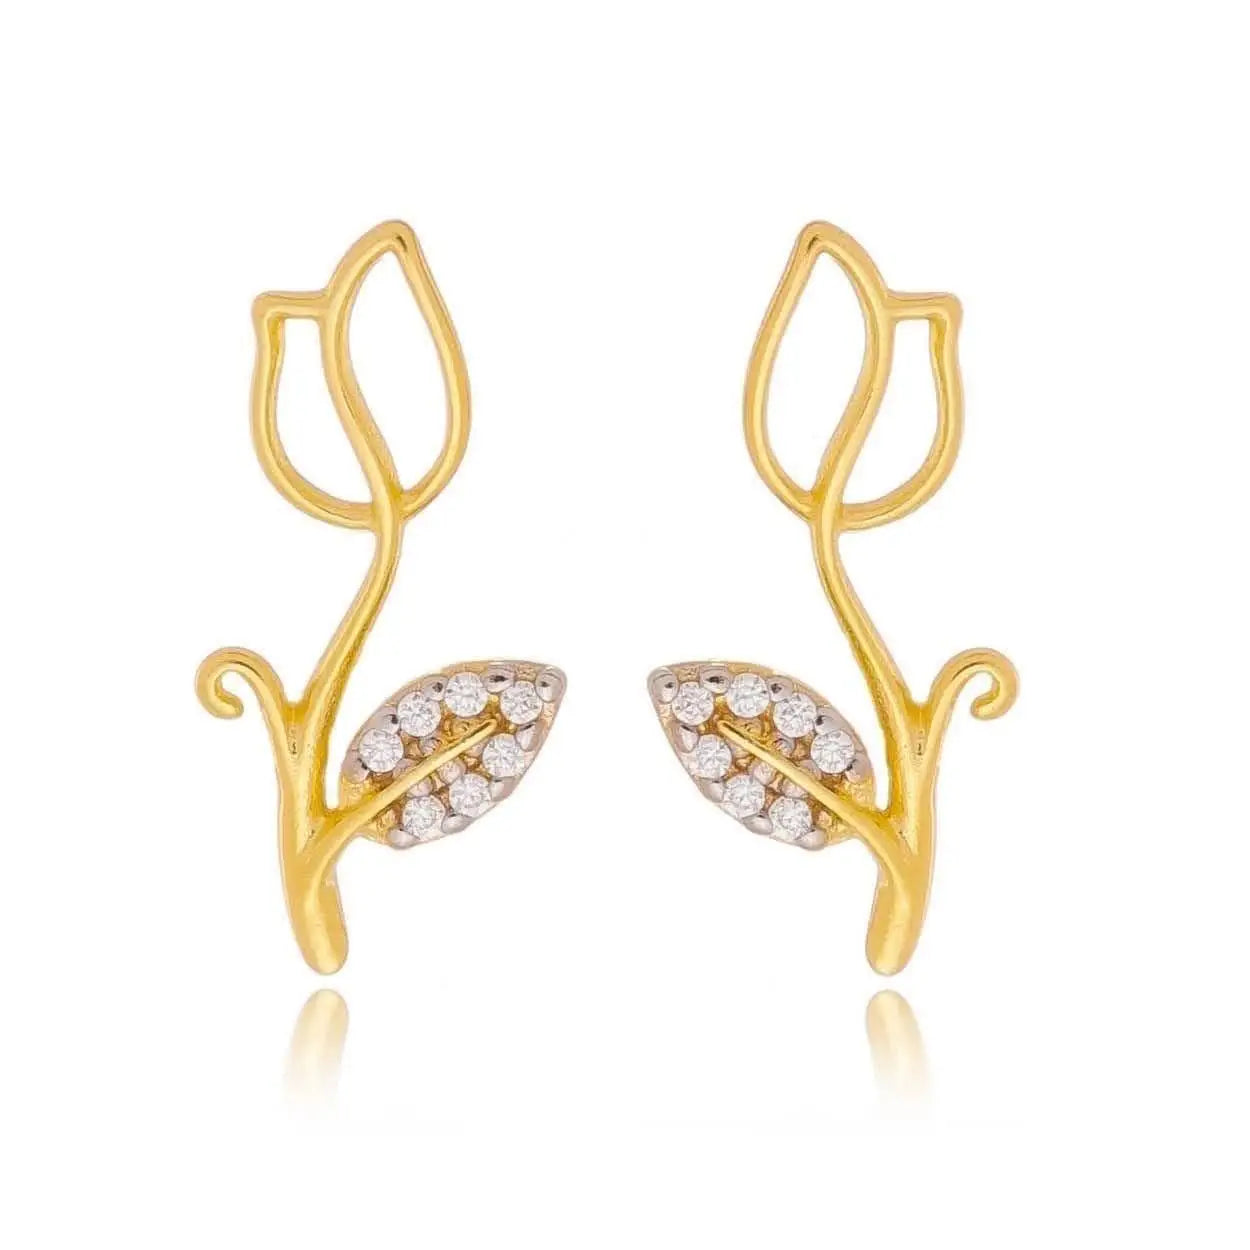 Goldfi | Tulip stud earrings with CZ stones, gold platted